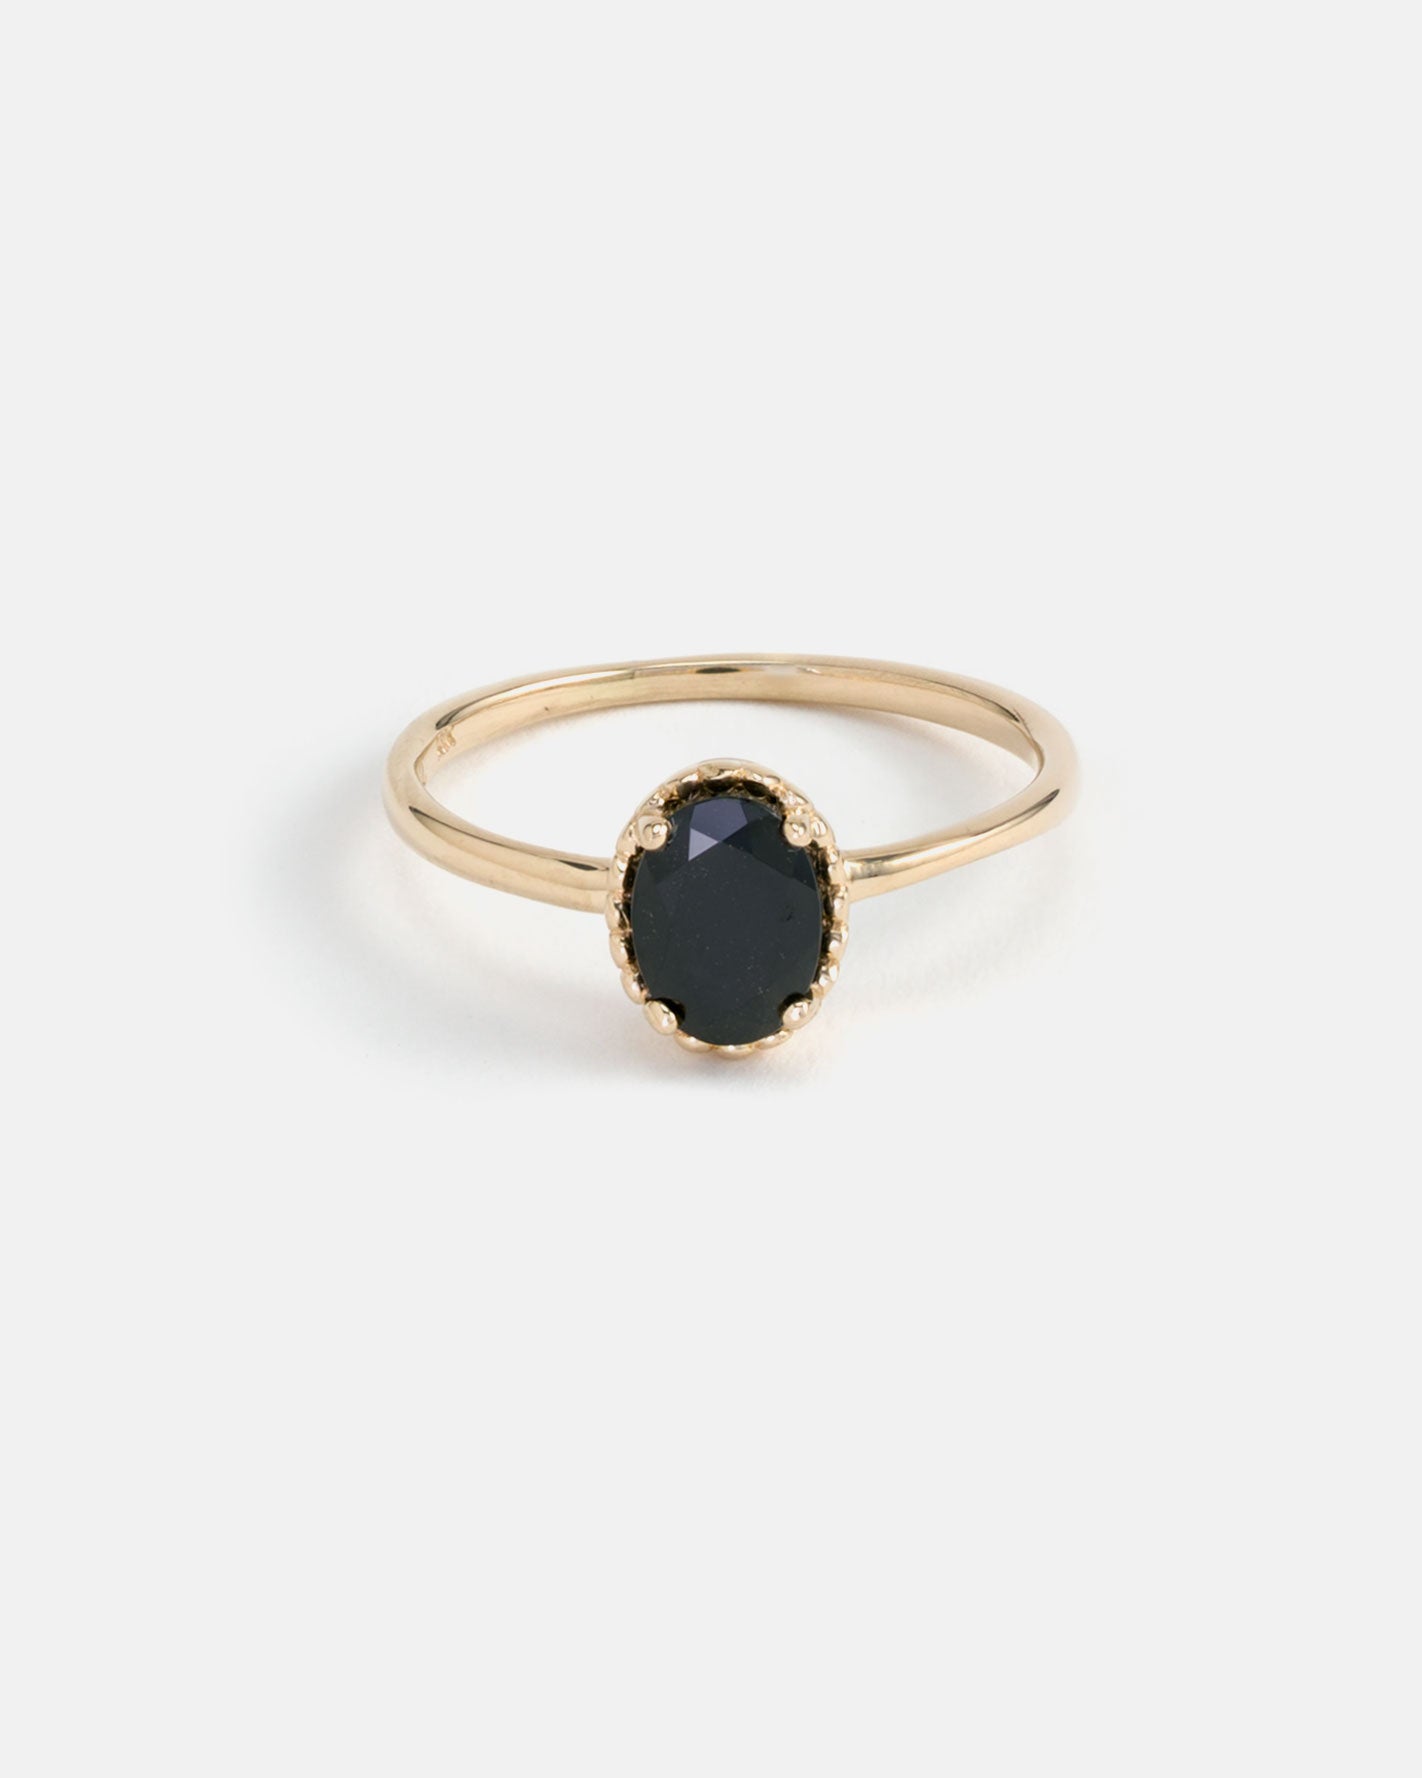 Oval Galatée Ring in 14k Yellow Gold with Black Spinel